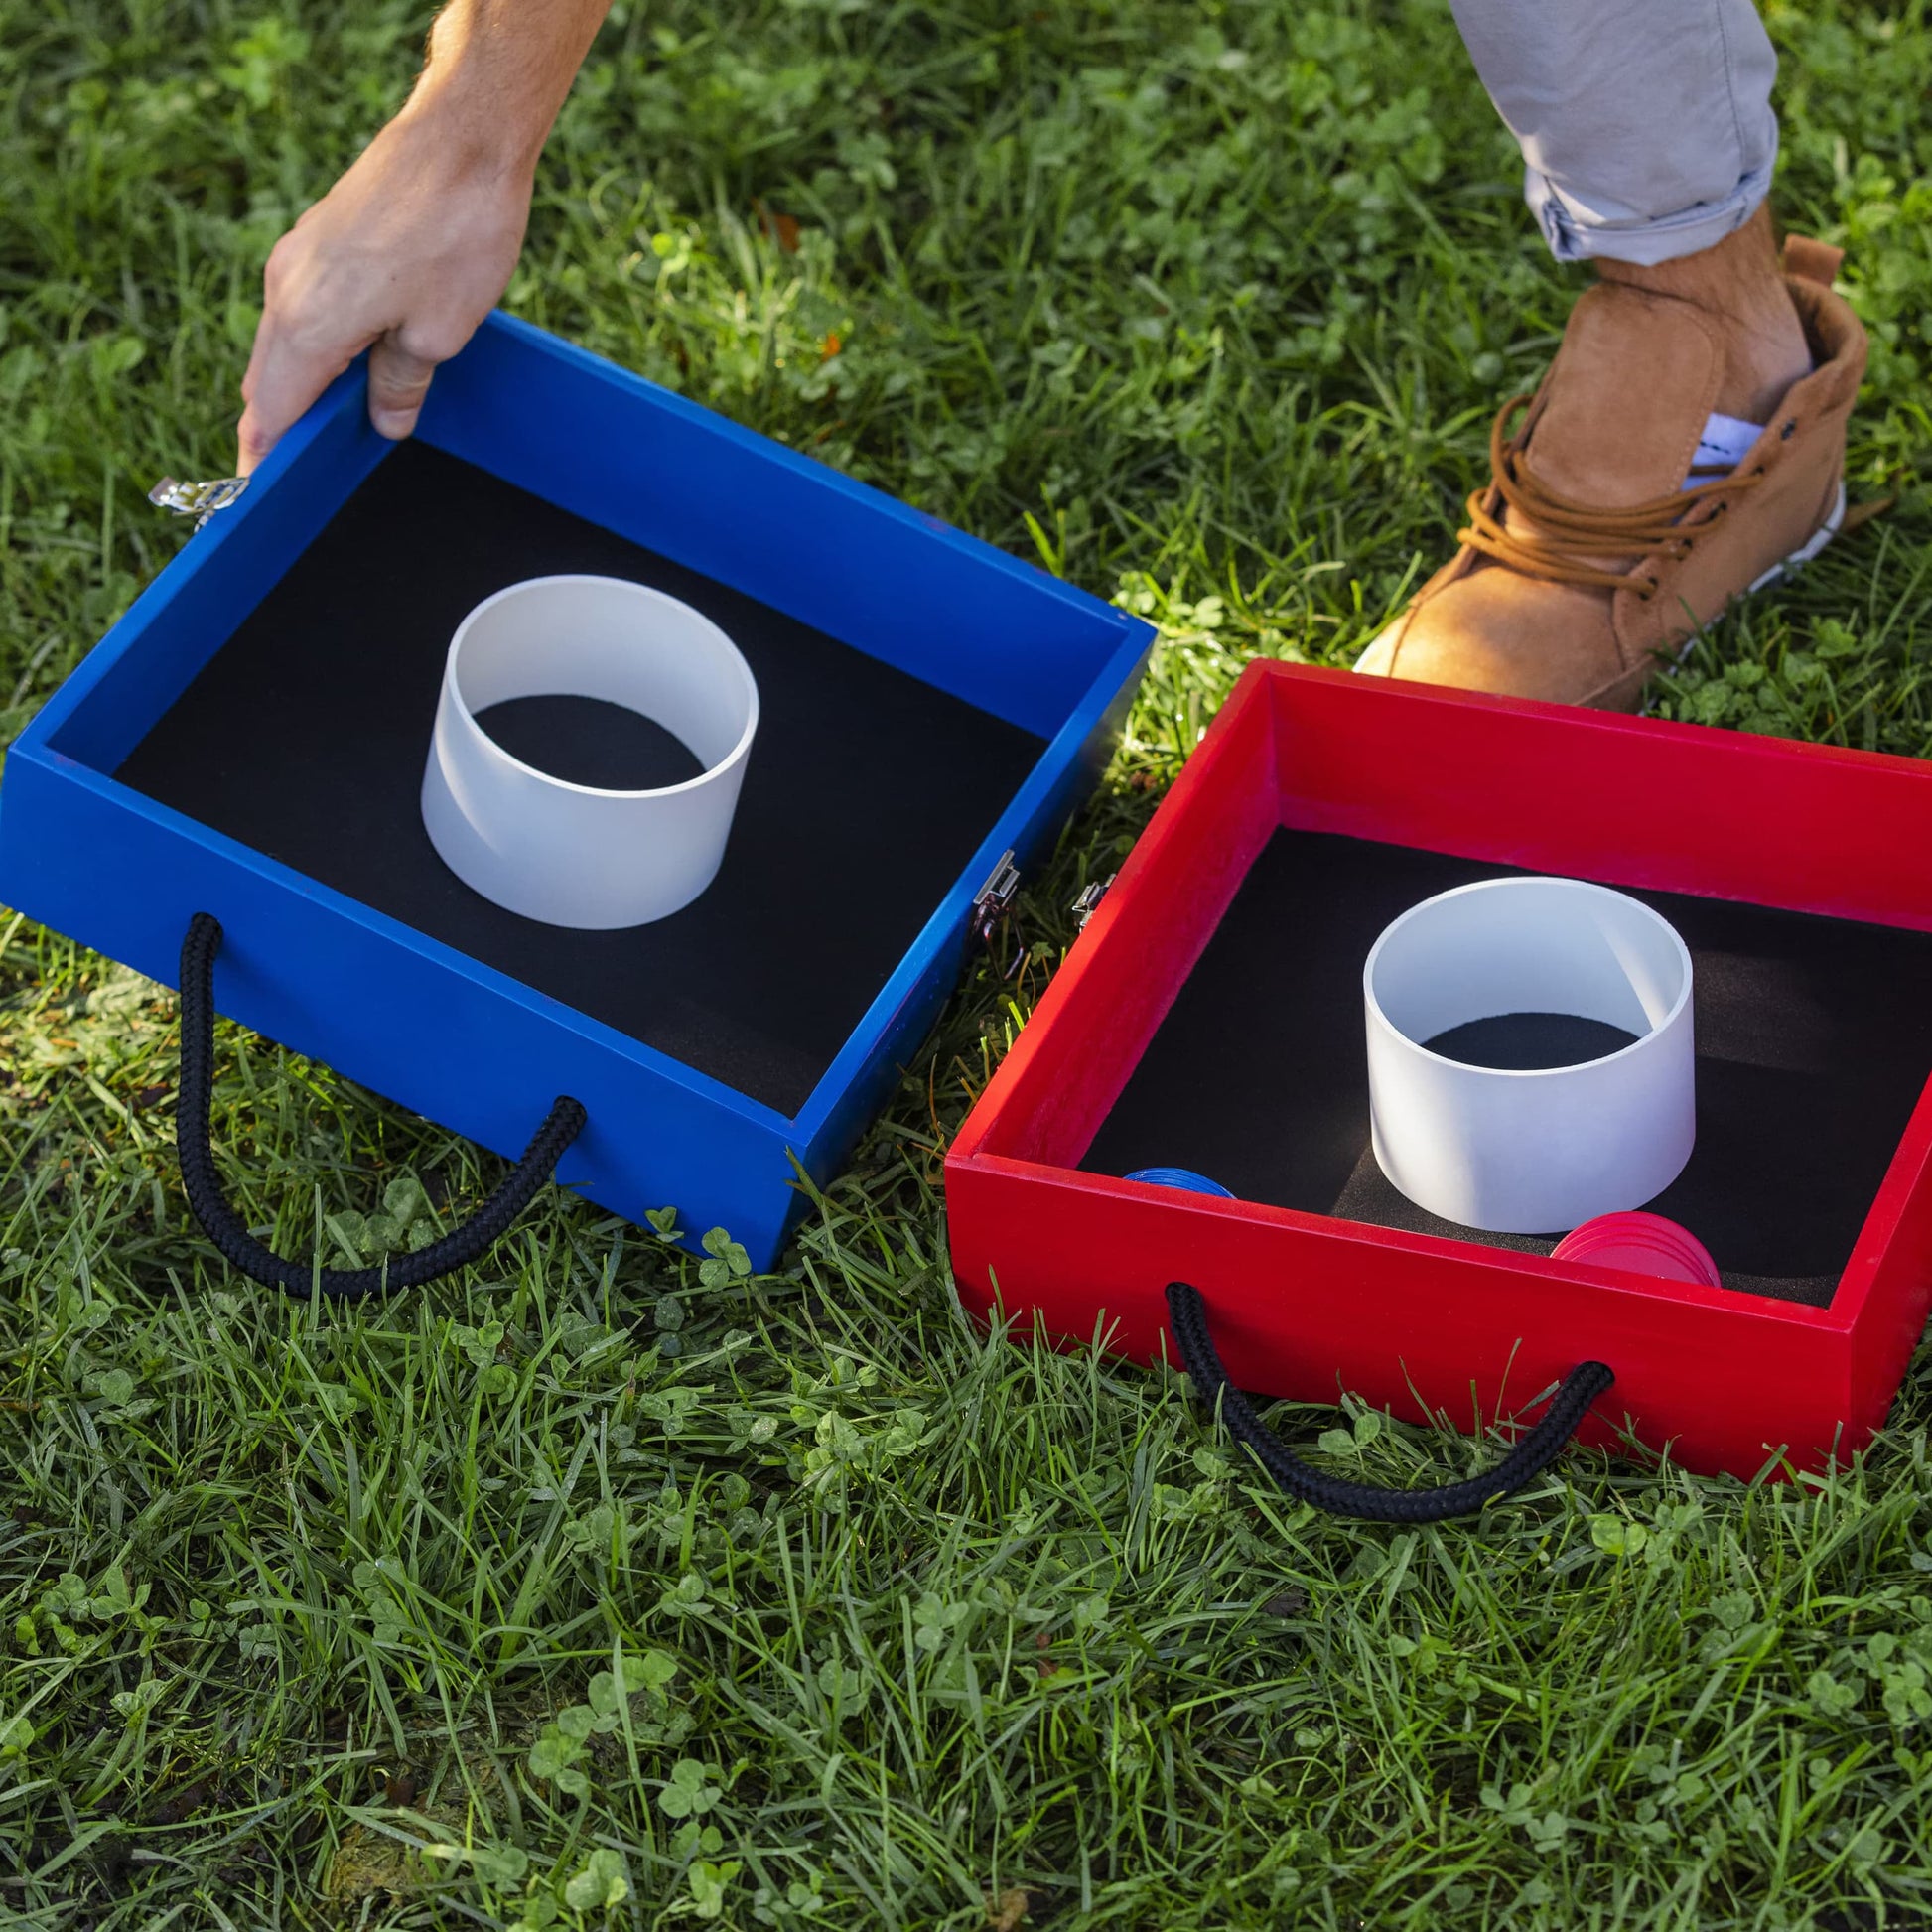 Sportcraft Wooden Washer Toss Game - Lifestyle Image - Showing both Blue & Red Product Parts sitting on grass